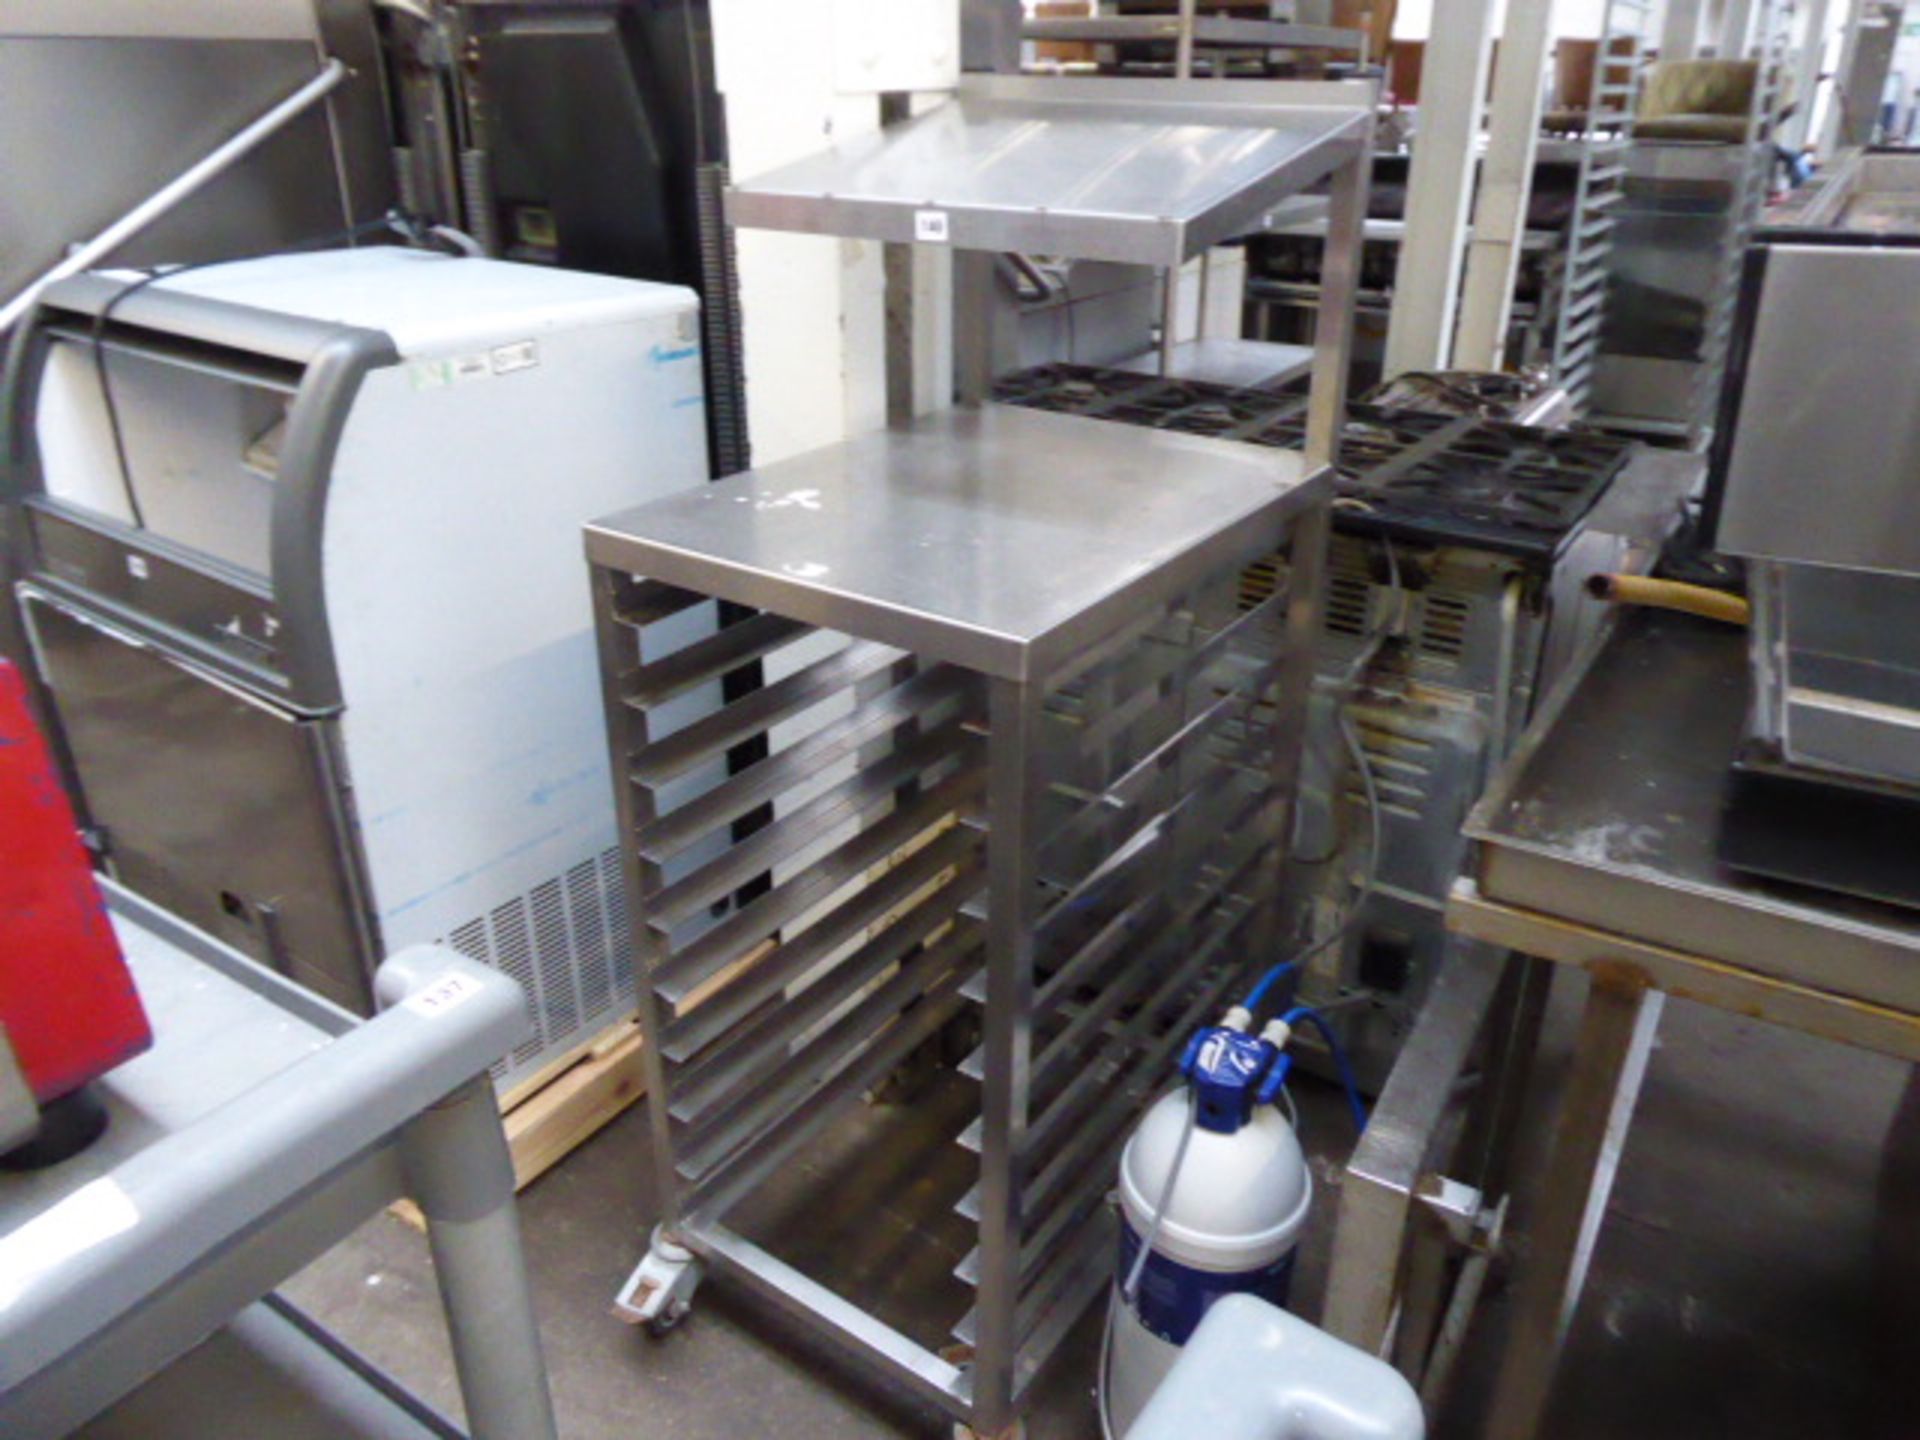 48cm stainless steel mobile prep station with shelf over and space for trays under